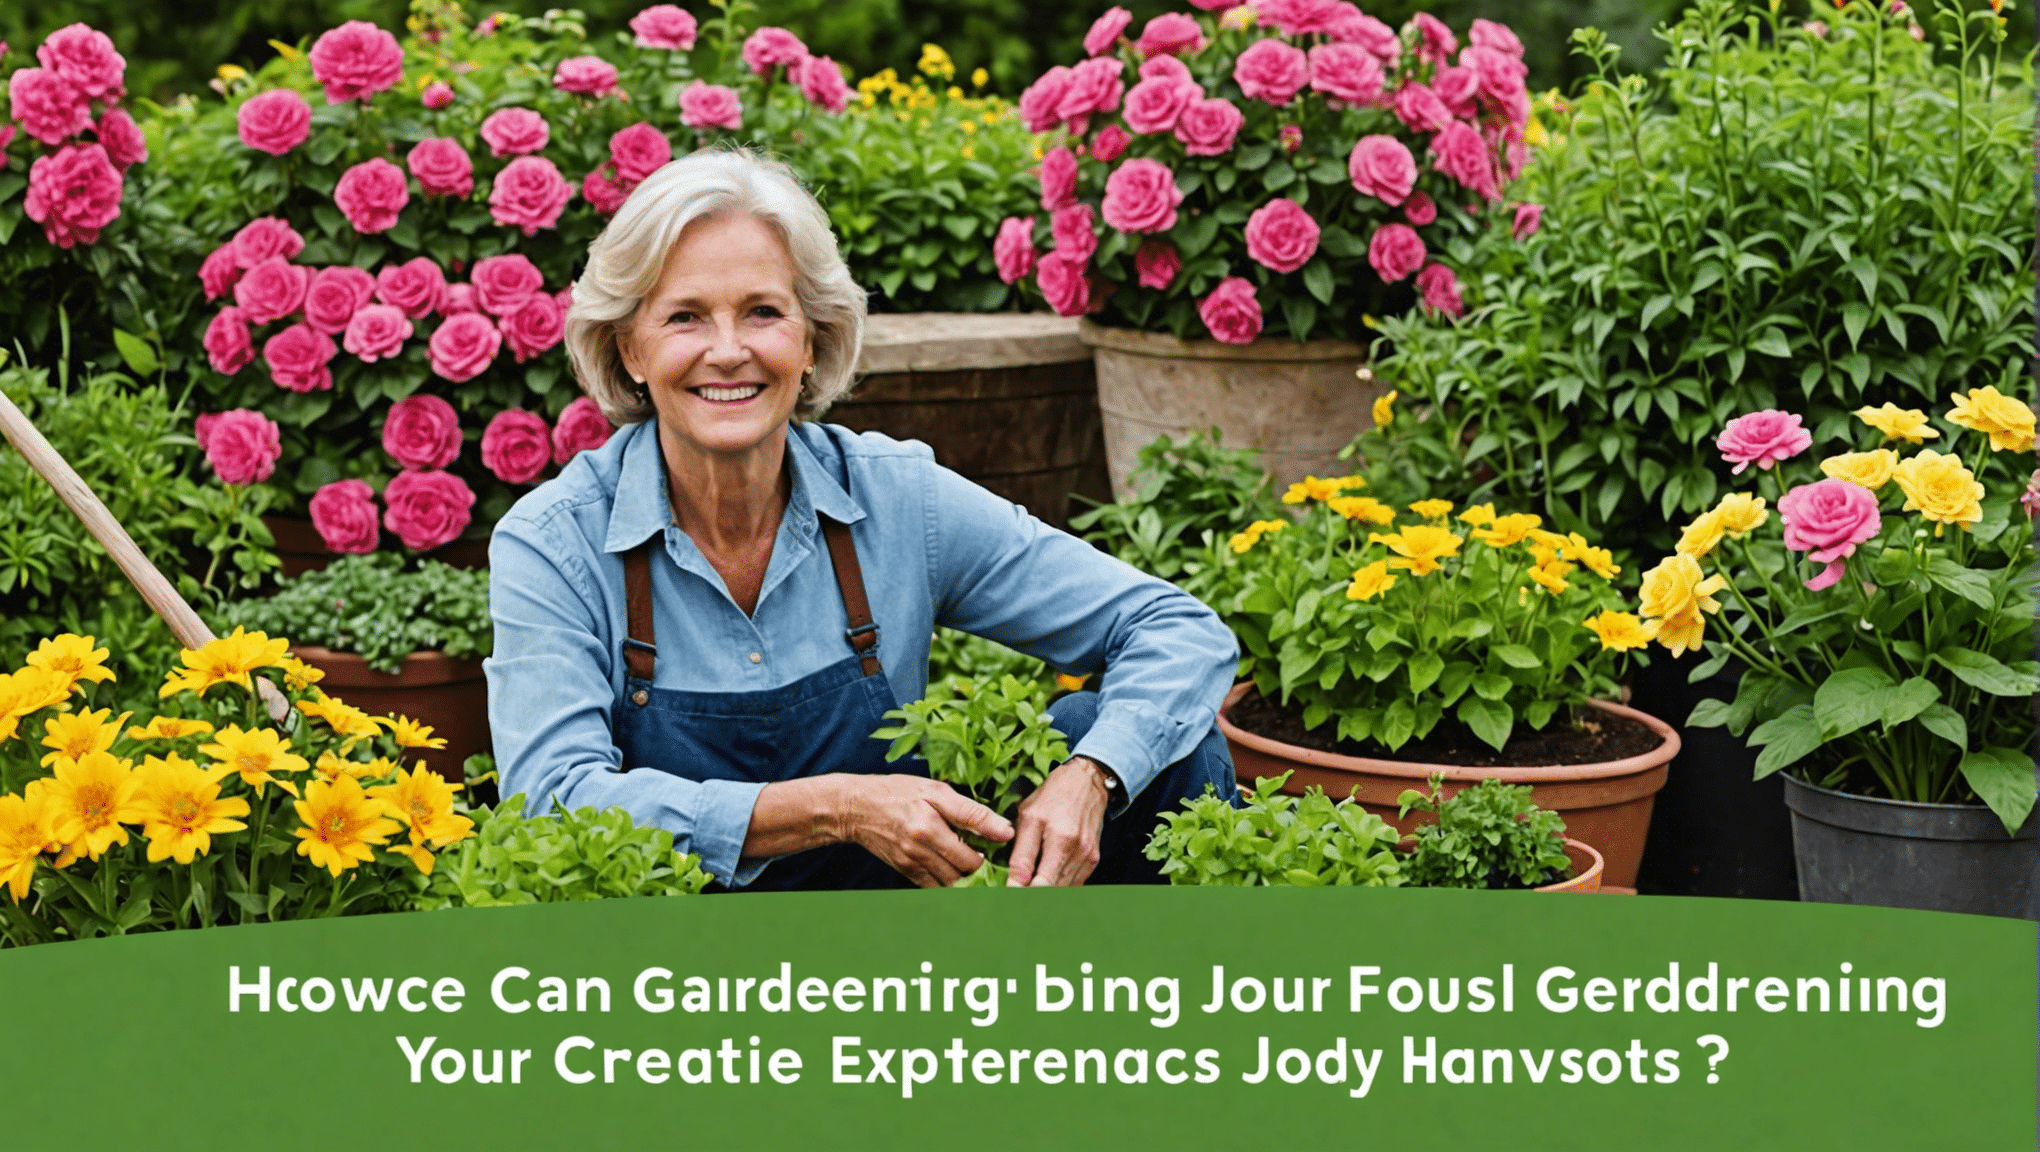 discover how gardening journal ideas can enhance and enrich your gardening journey. explore the benefits and tips to elevate your gardening experience.